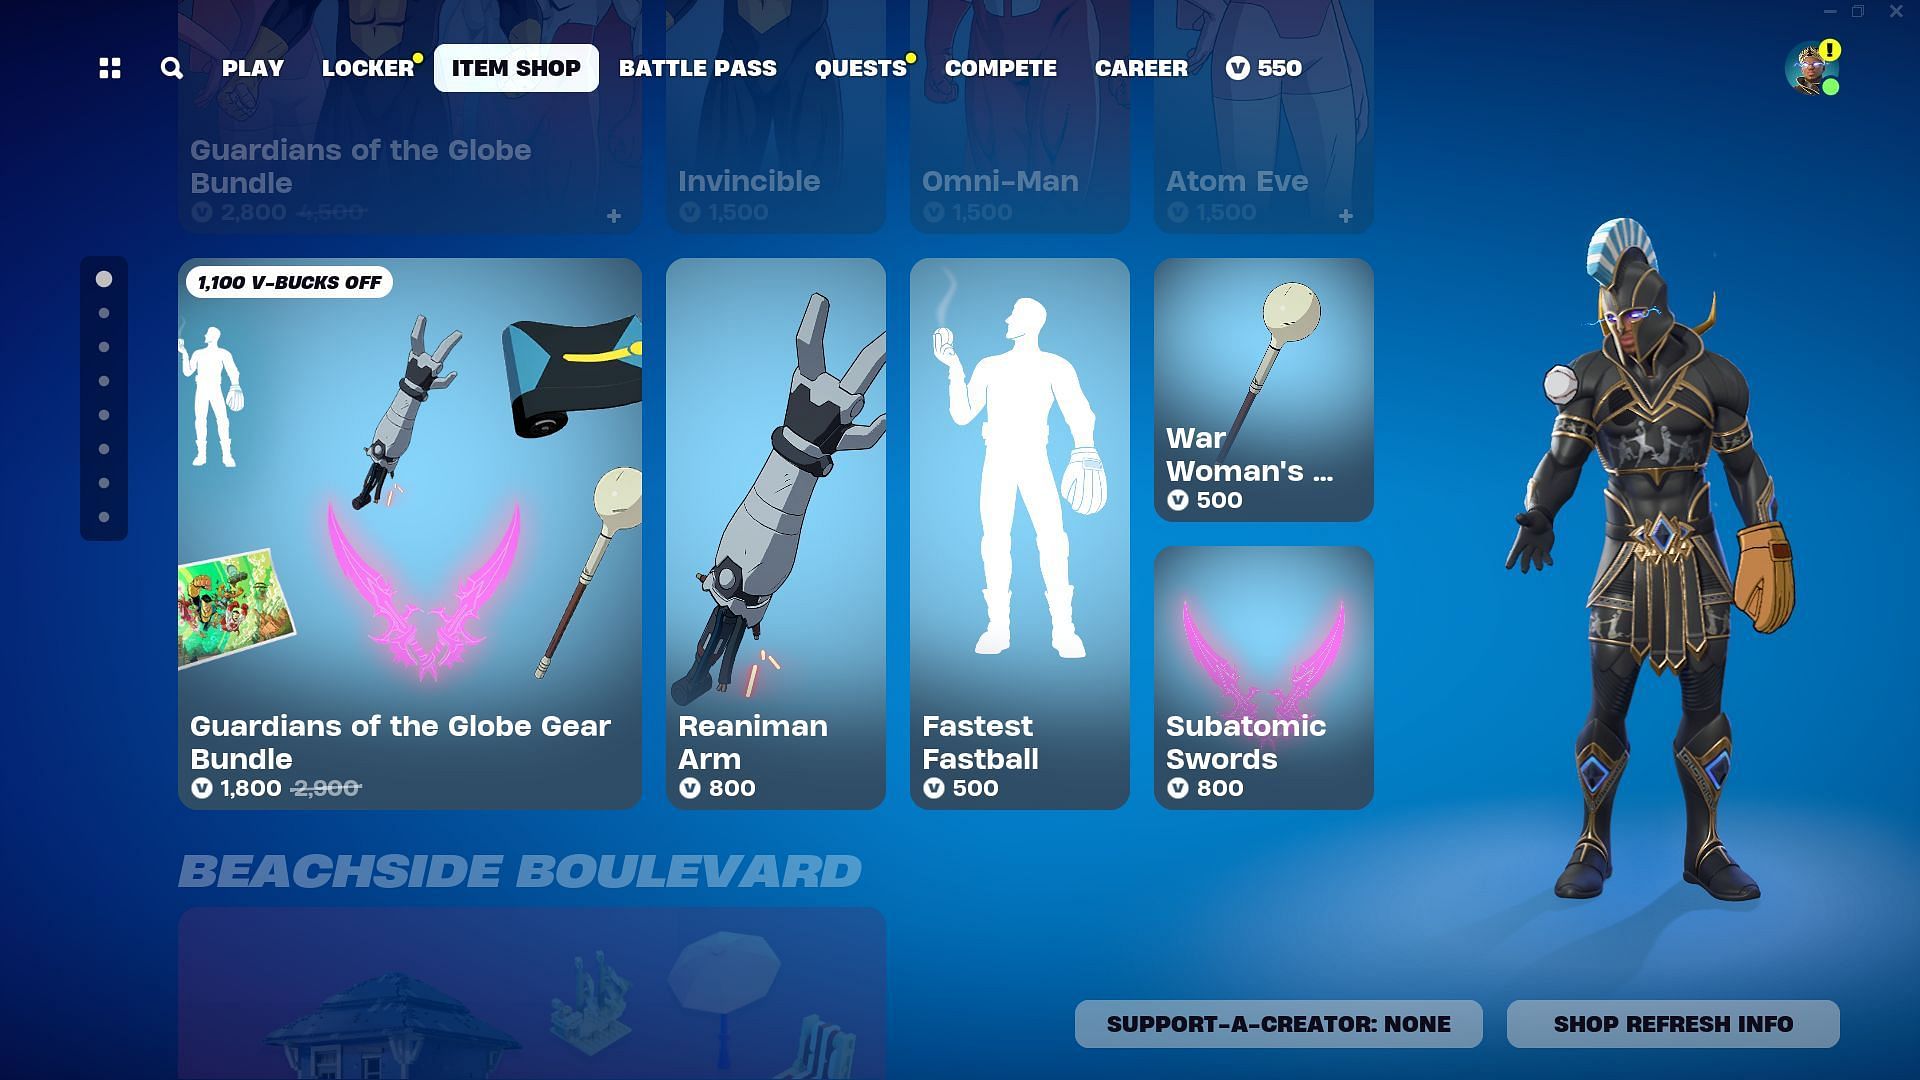 Guardians of the Globe Gear Bundle is currently listed in the Item Shop (Image via Epic Games/Fortnite)